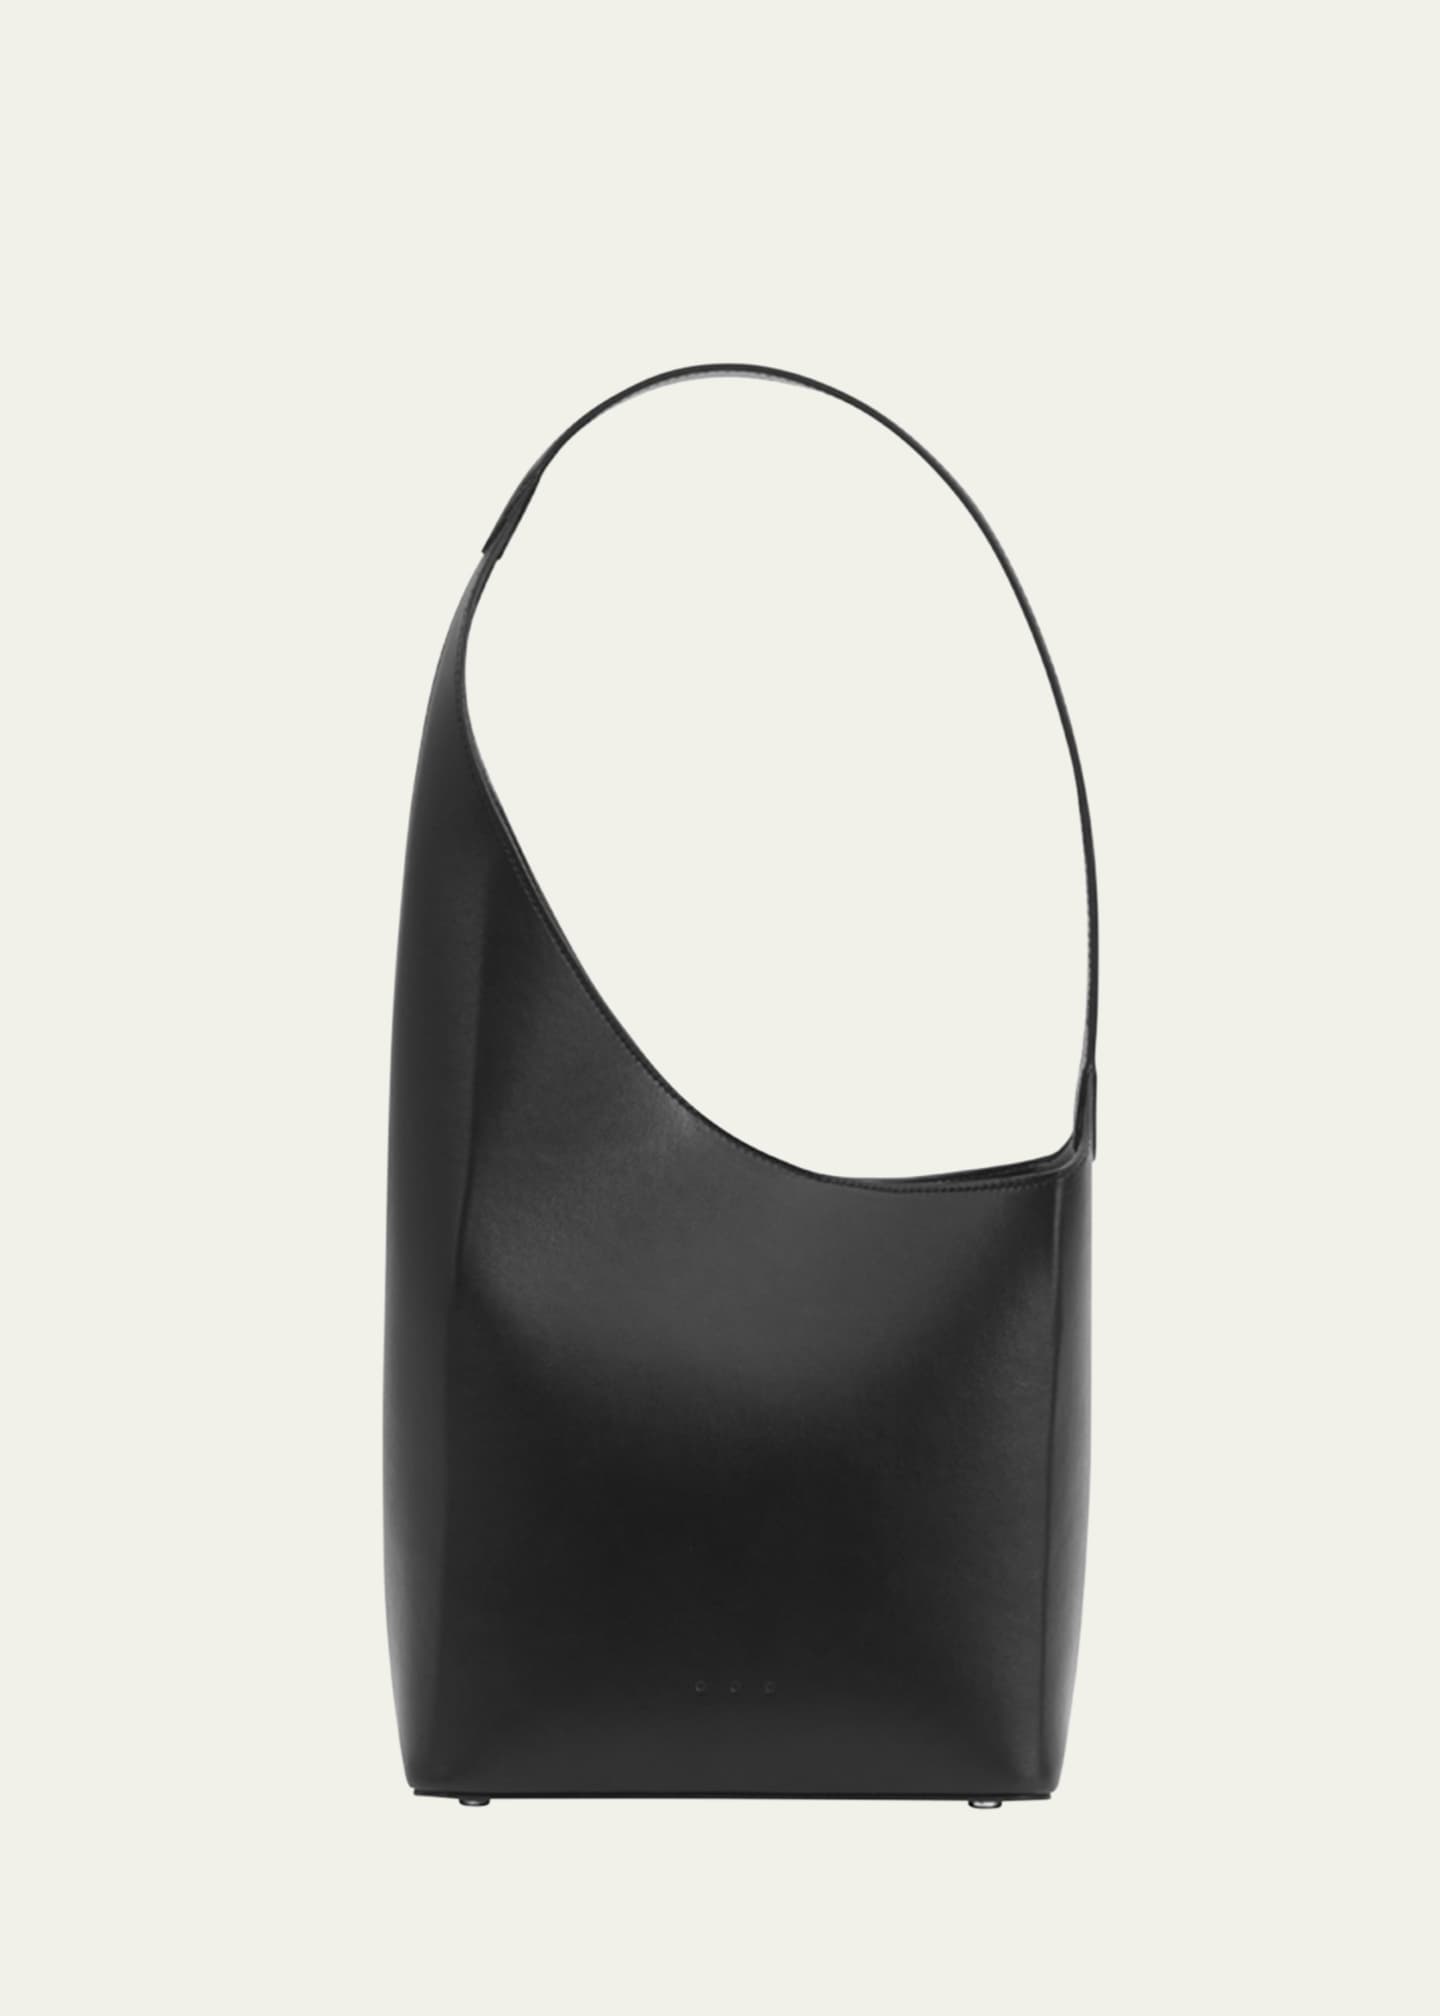 Aesther Ekme Demi Lune Leather Tote Bag